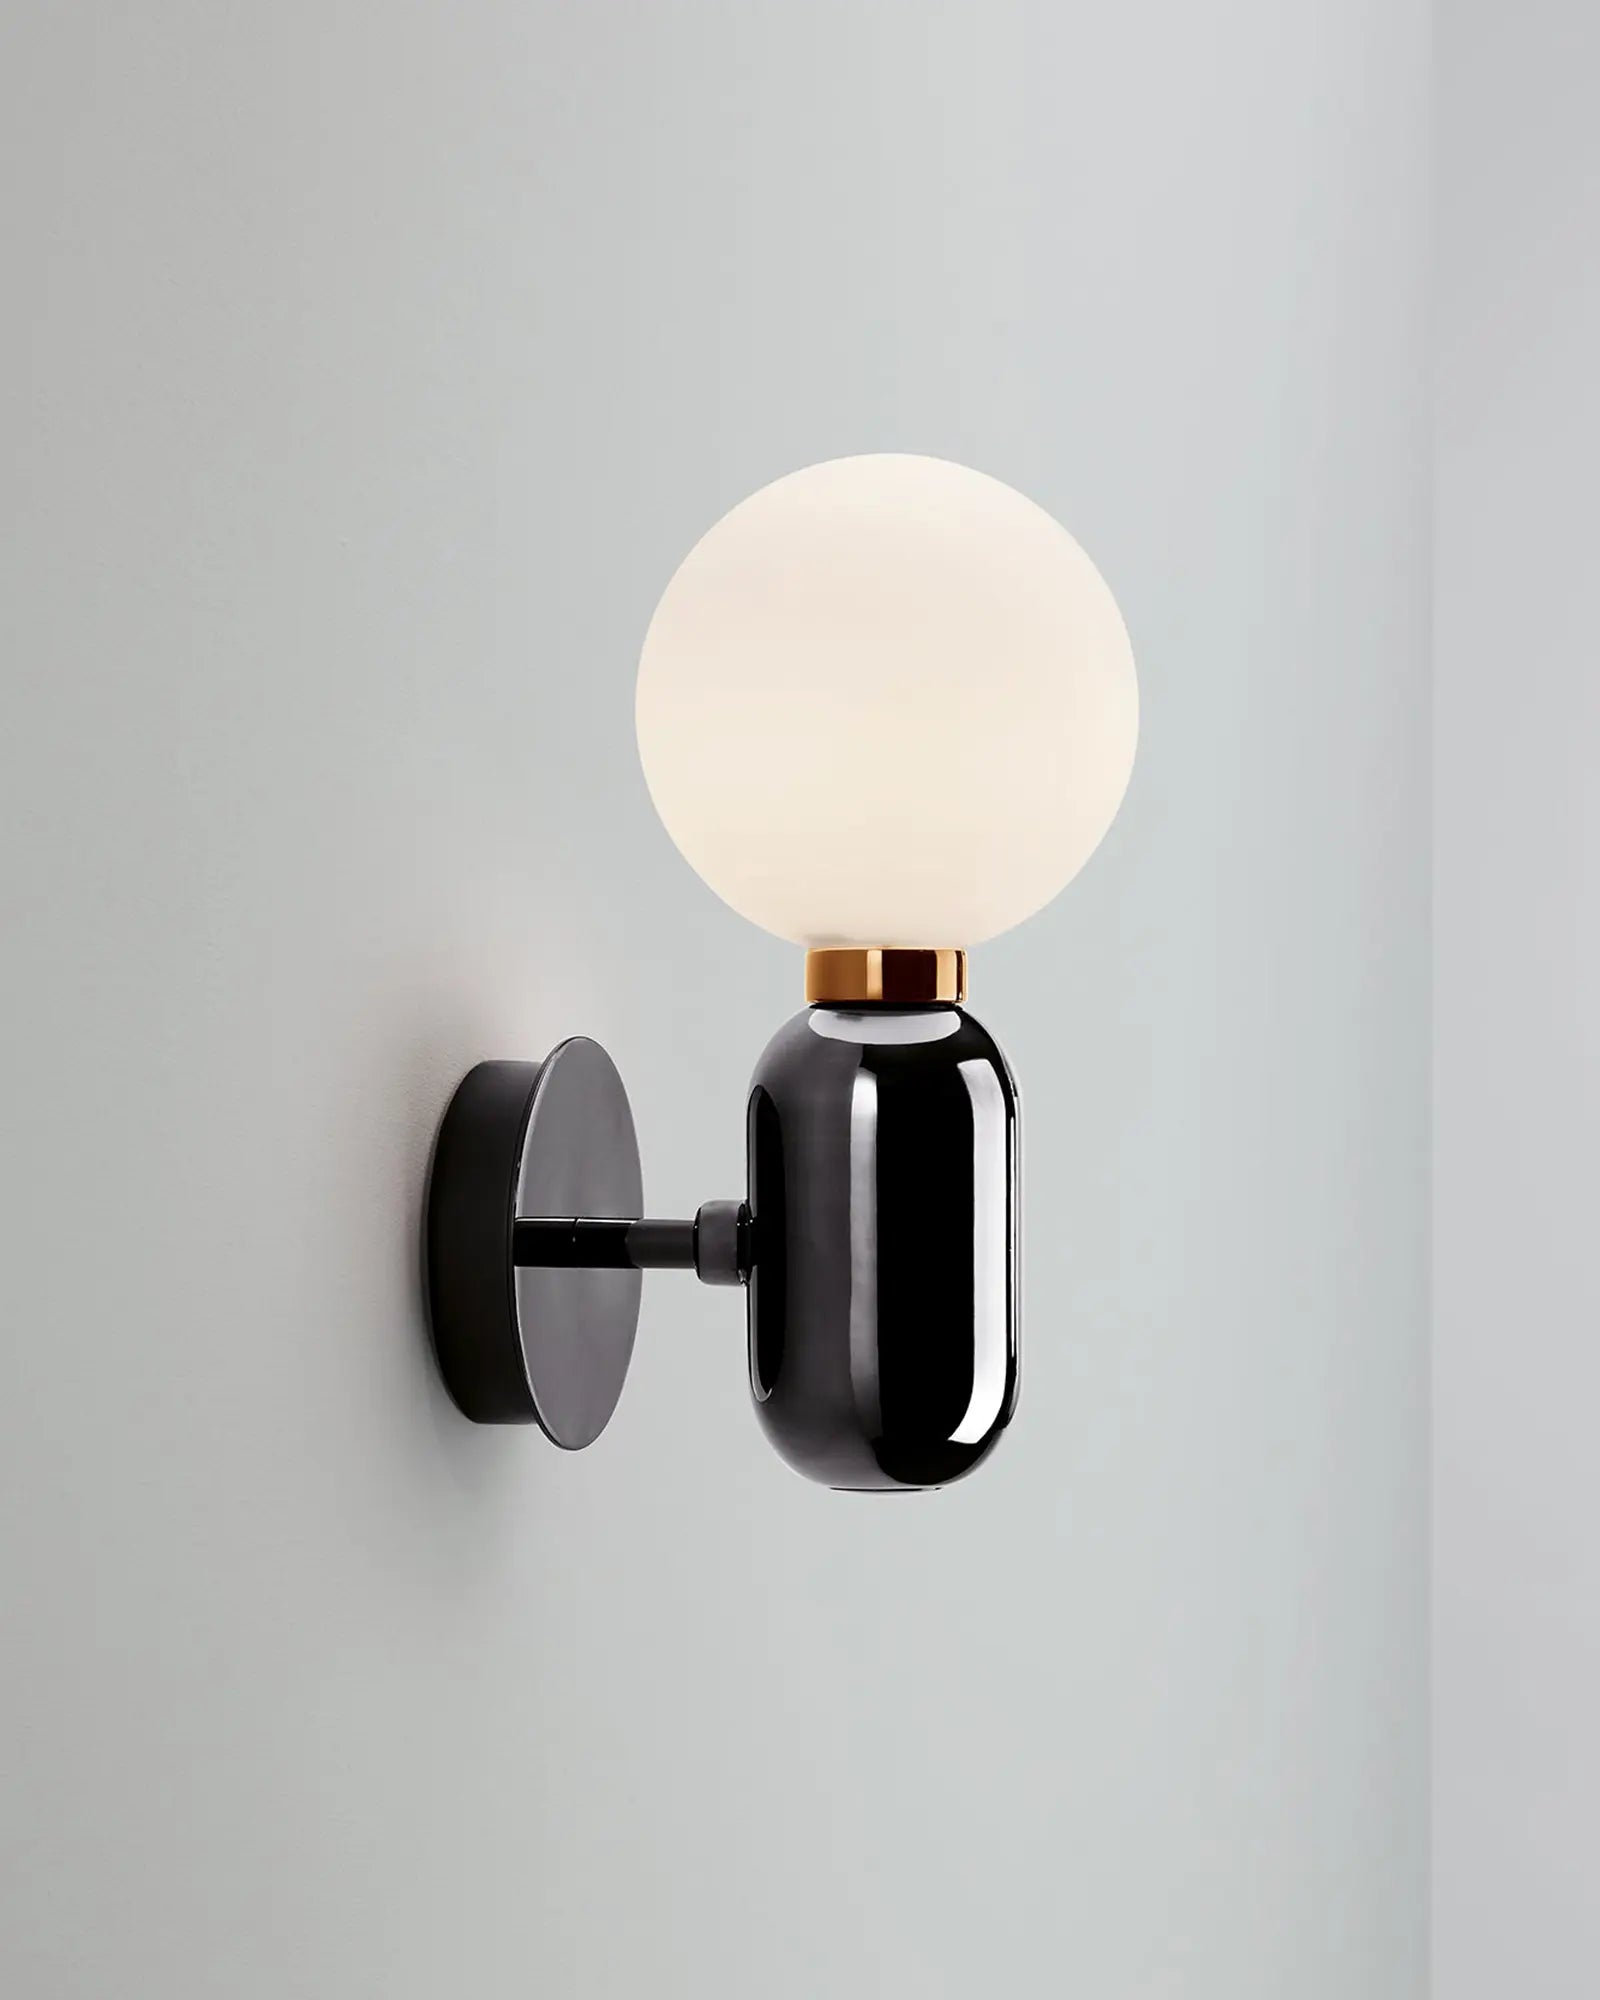 Aballs ceramic and blown glass orb wall lamp